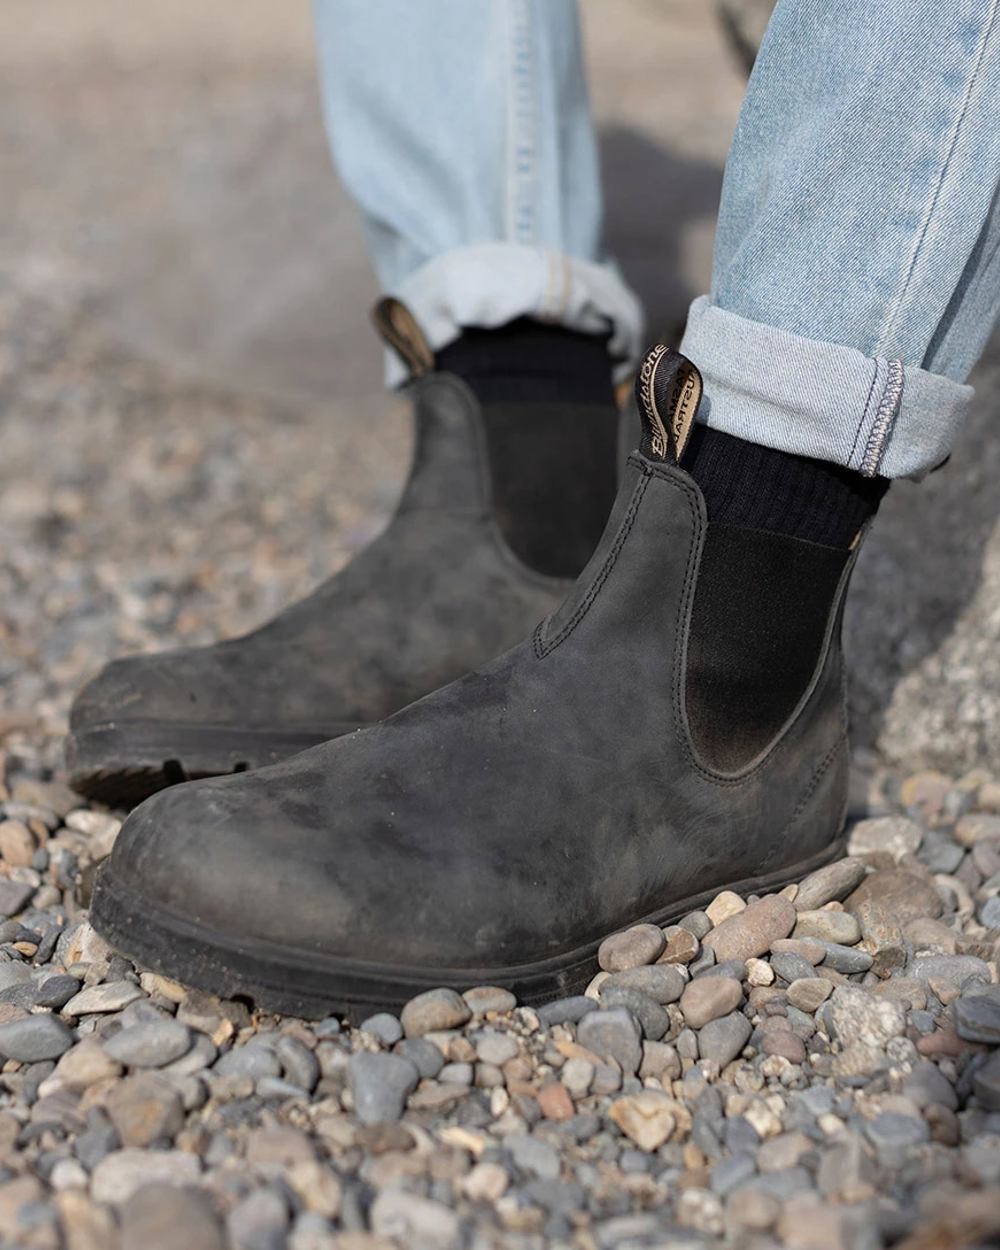 Blundstone 587 Rustic Black Leather Boots